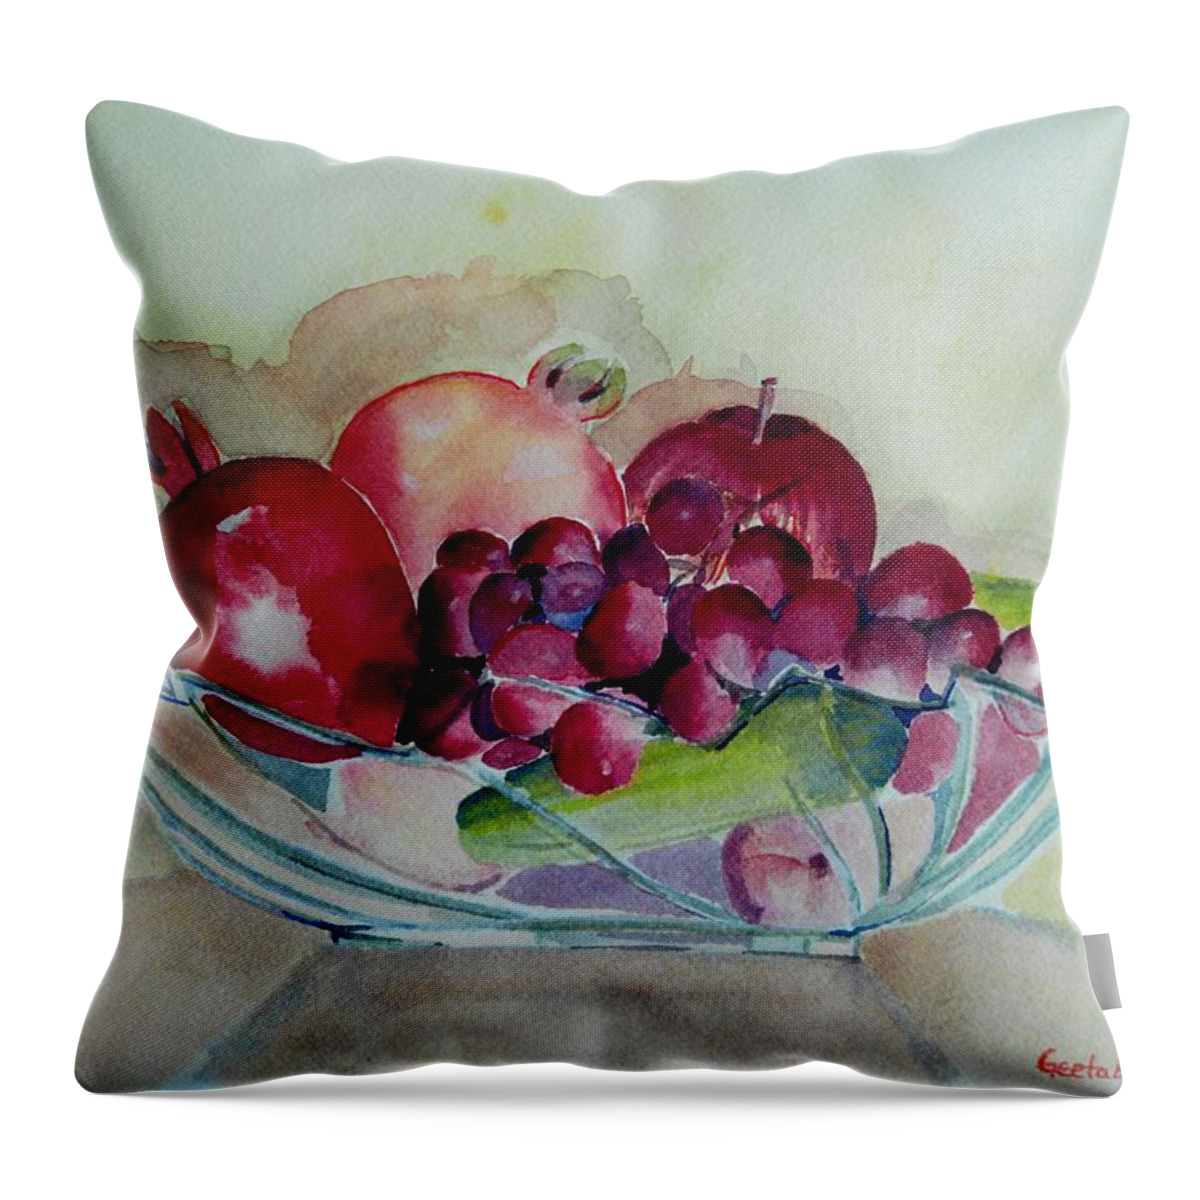 Pomegranate Throw Pillow featuring the painting Fruit Bowl Still Life by Geeta Yerra